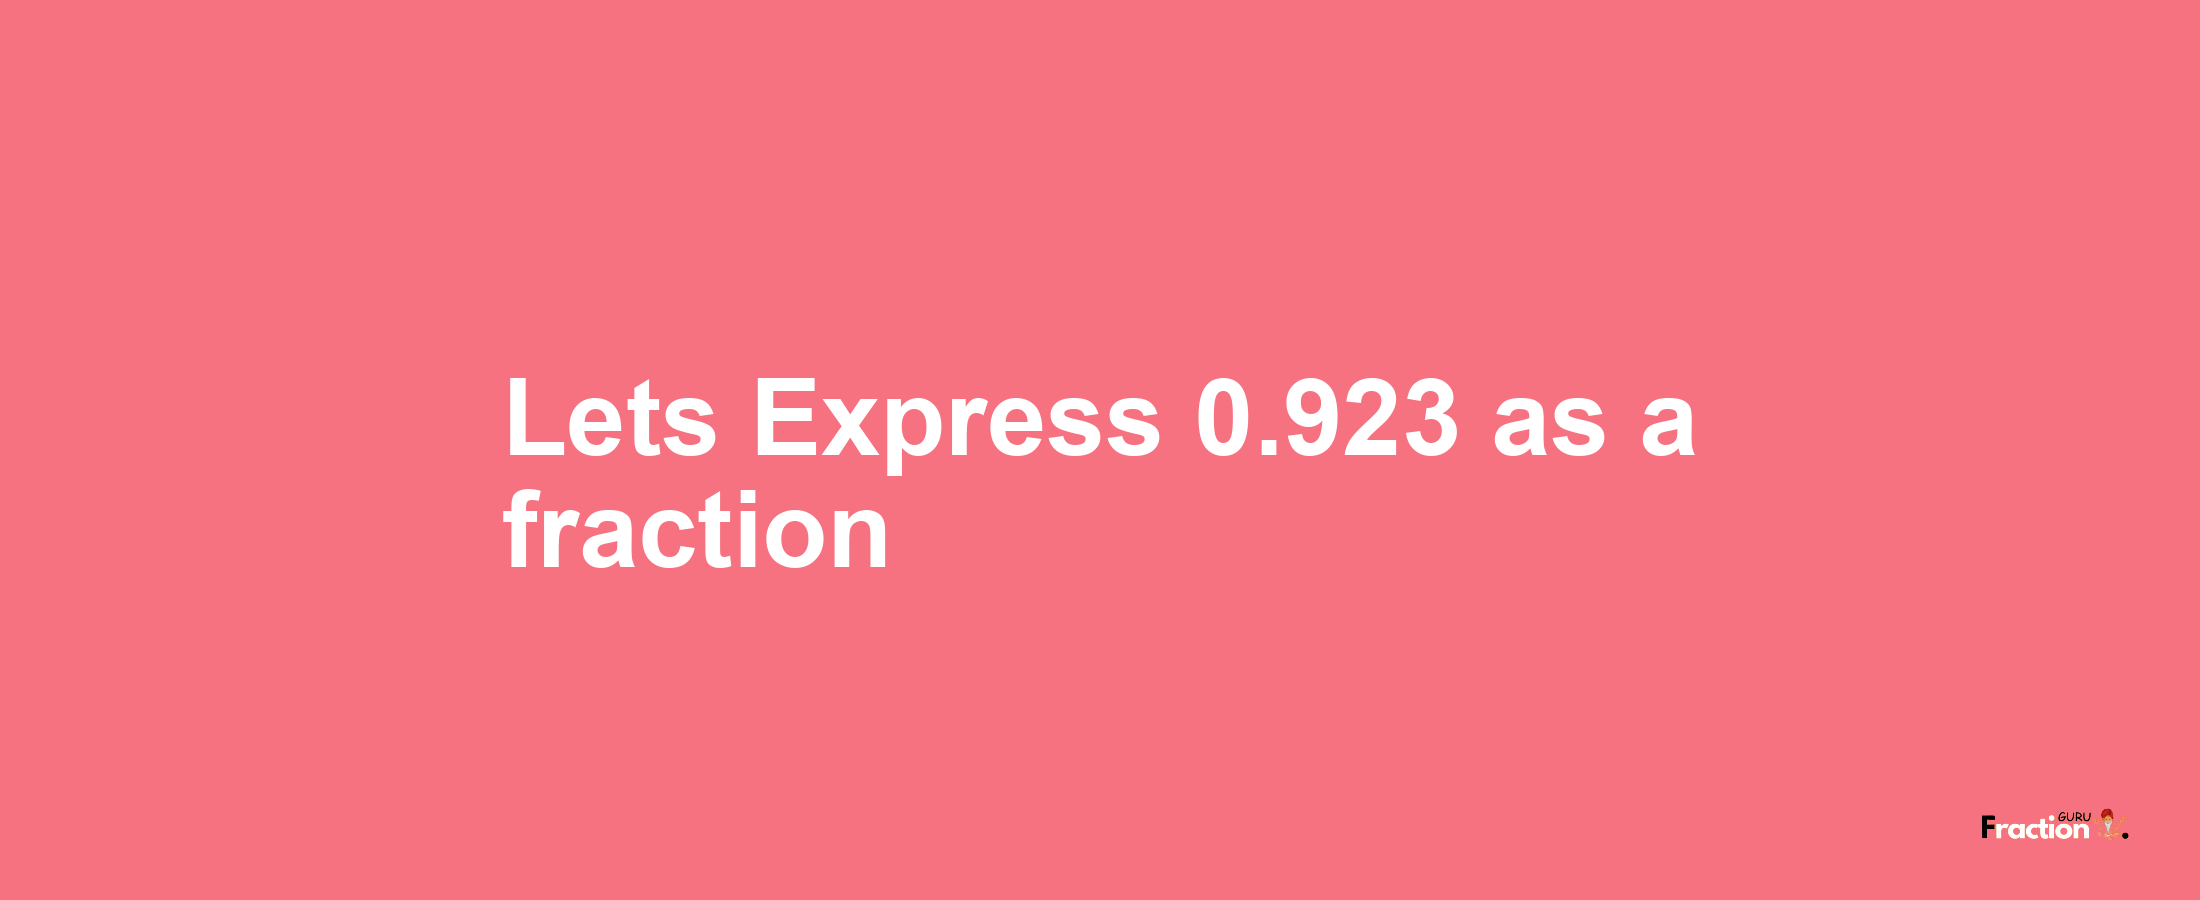 Lets Express 0.923 as afraction